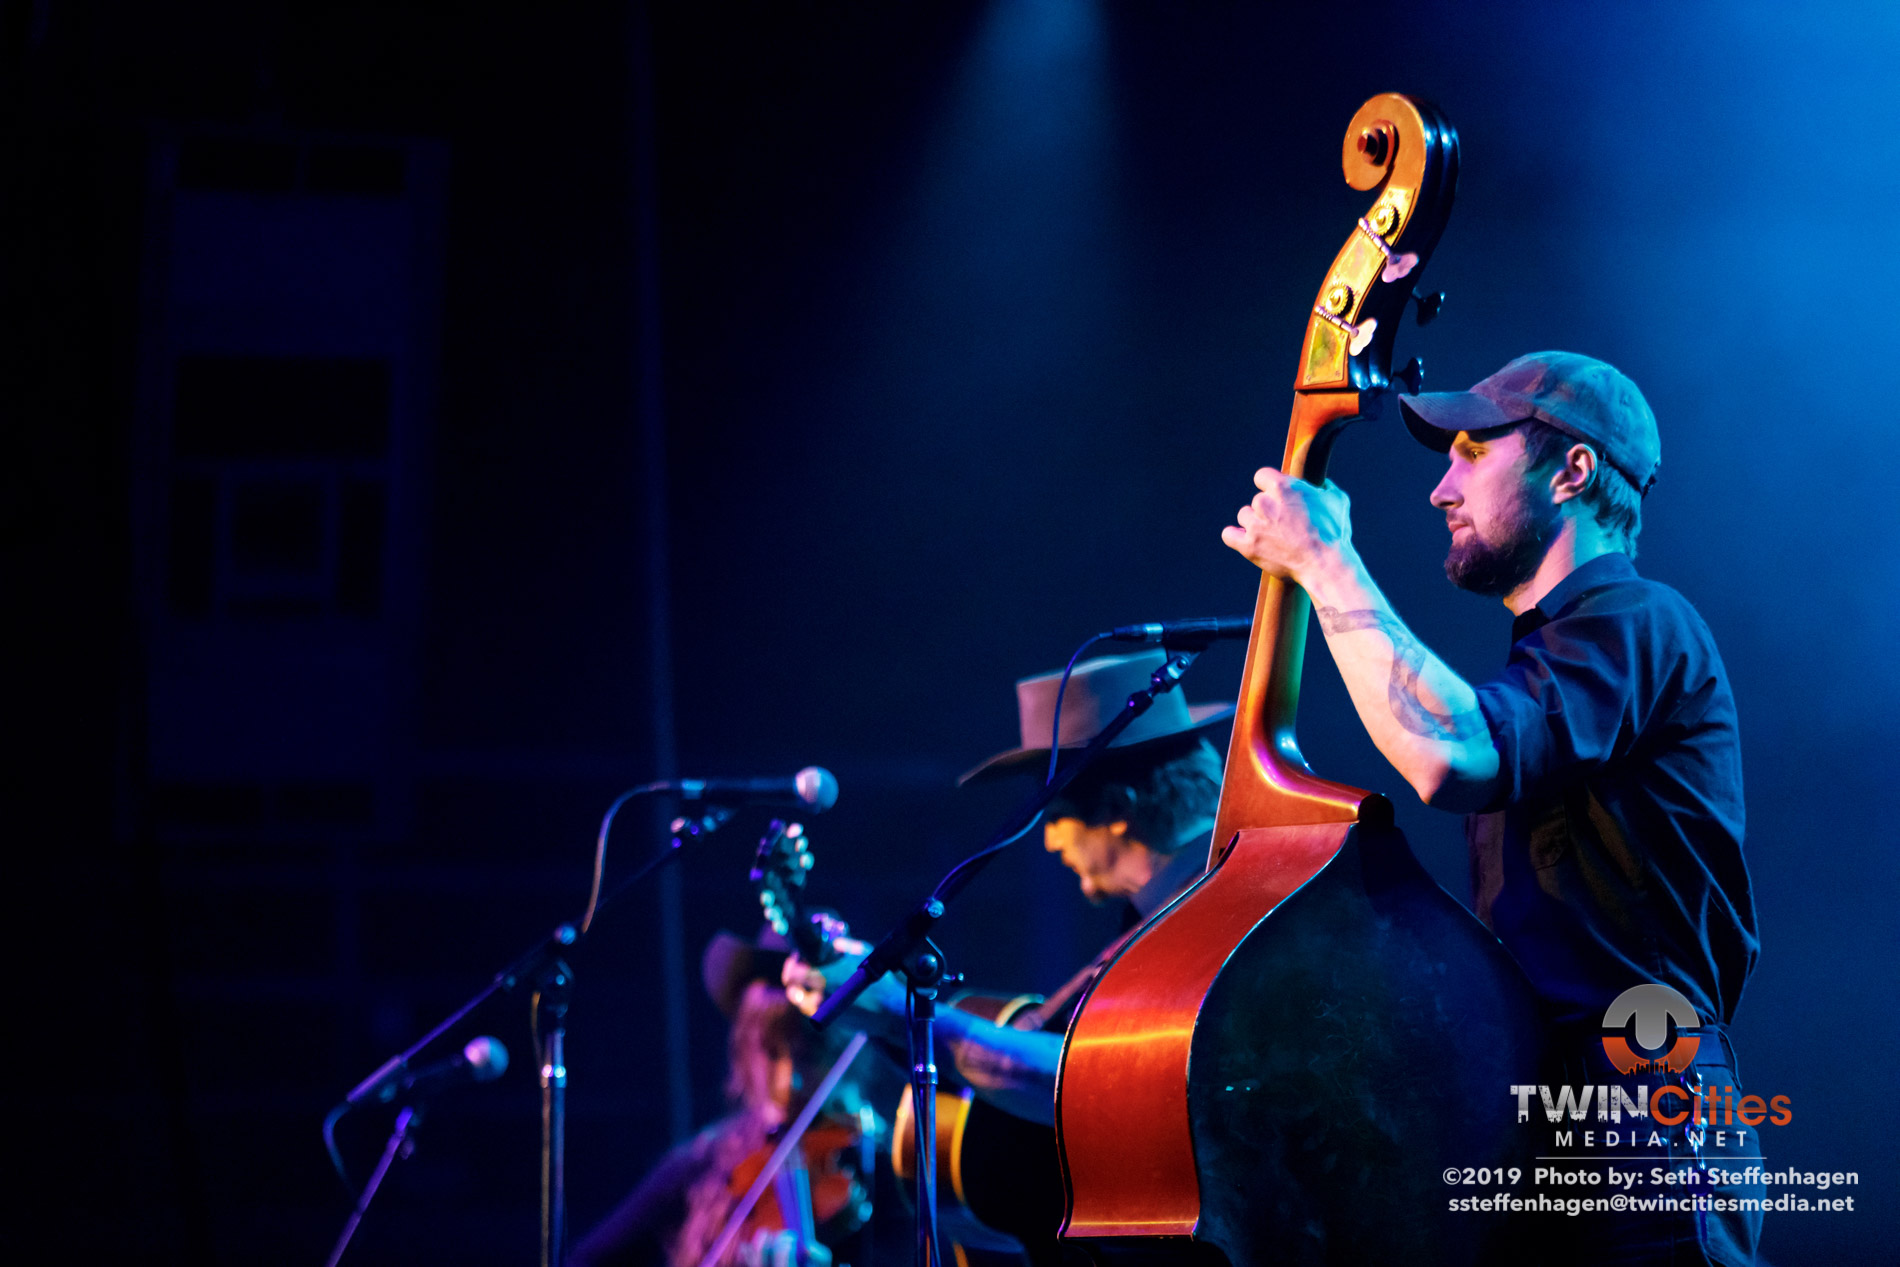 February 1, 2019 - Minneapolis, Minnesota, United States -  Lost Dog Street Band live in concert at First Avenue opening for The Devil Makes Three.

(Photo by Seth Steffenhagen/Steffenhagen Photography)